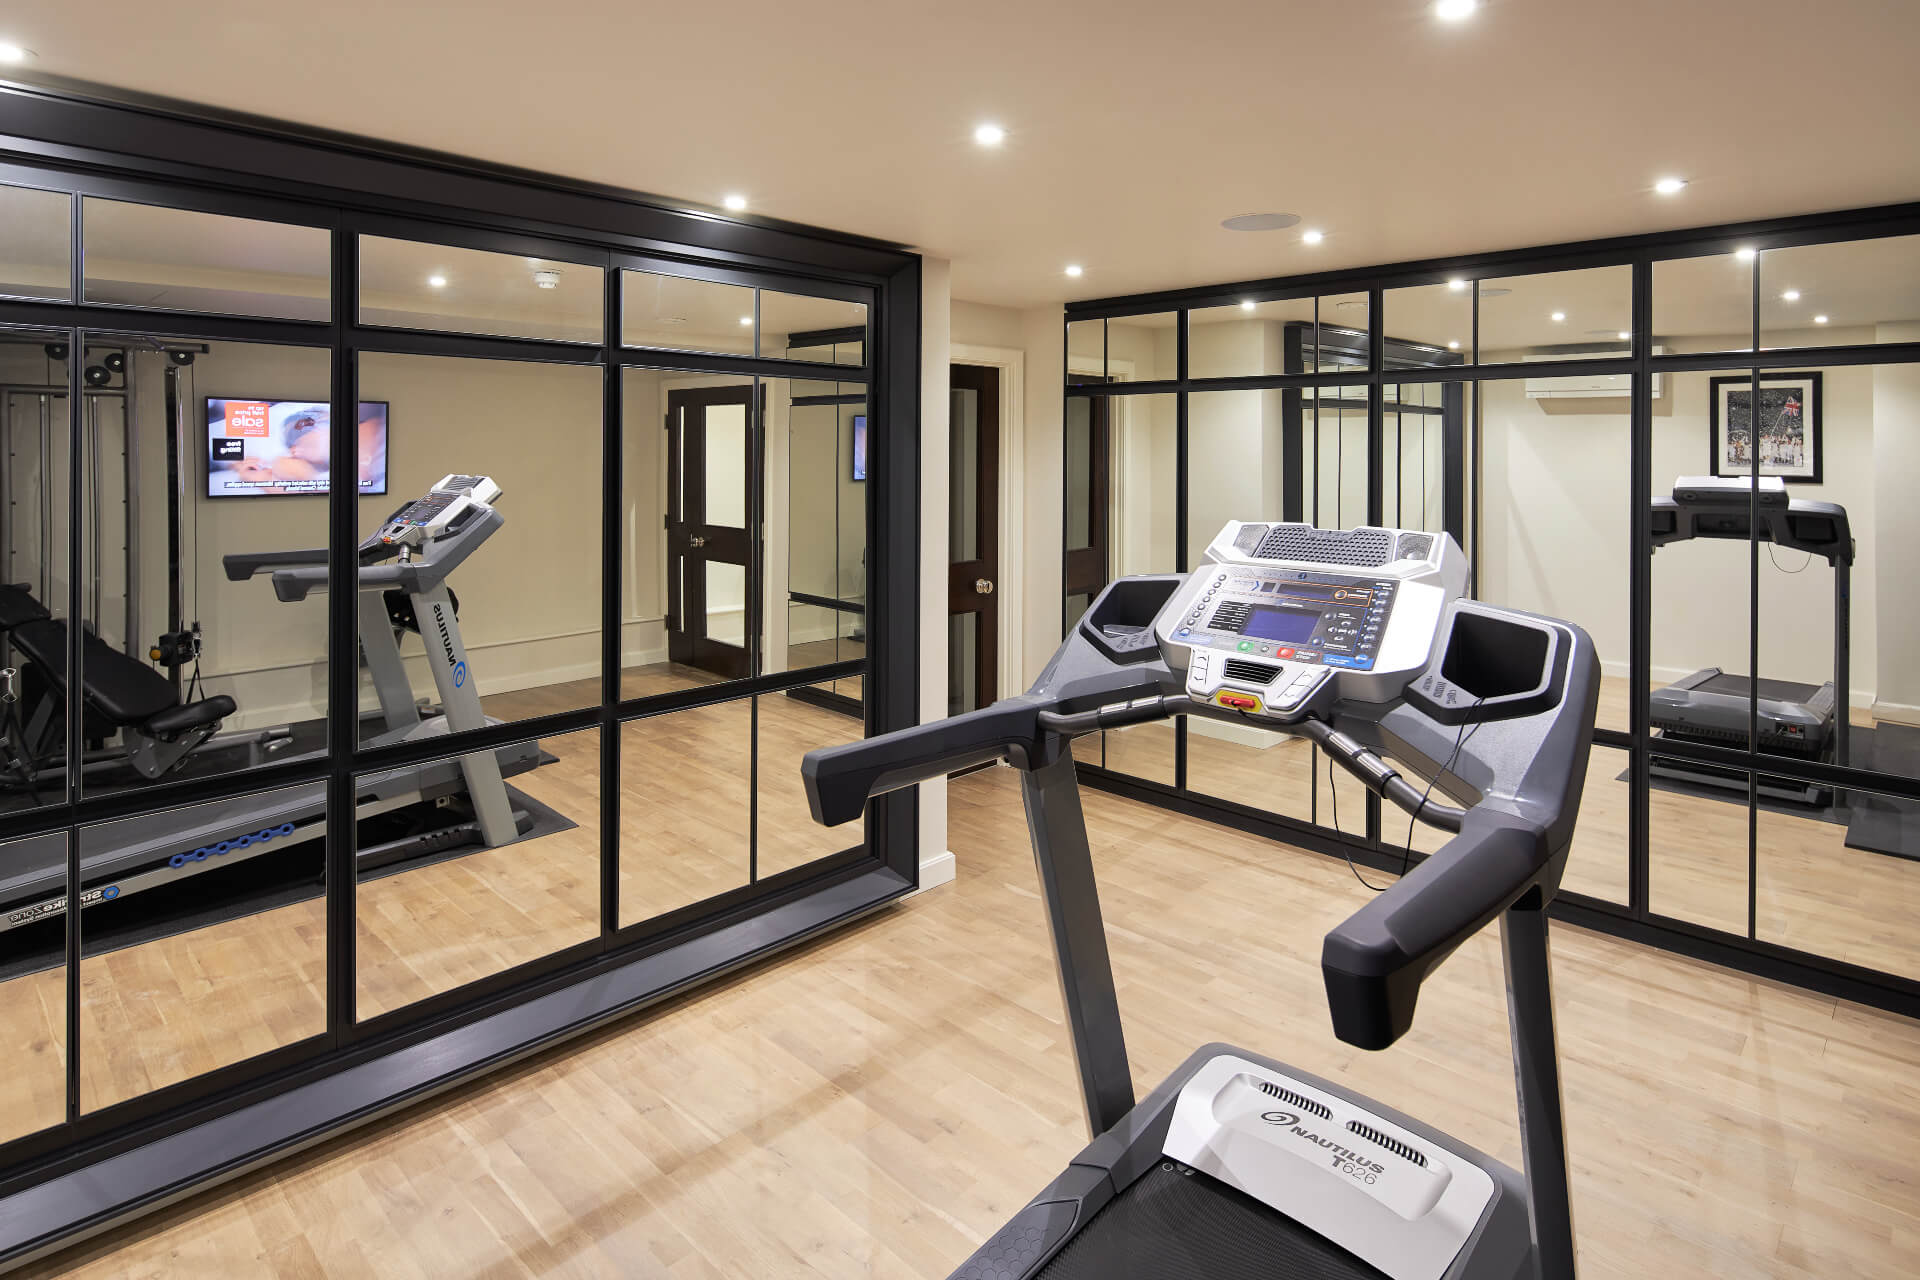 Mirror fronted cupboards in a home gym by Hetherington Newman